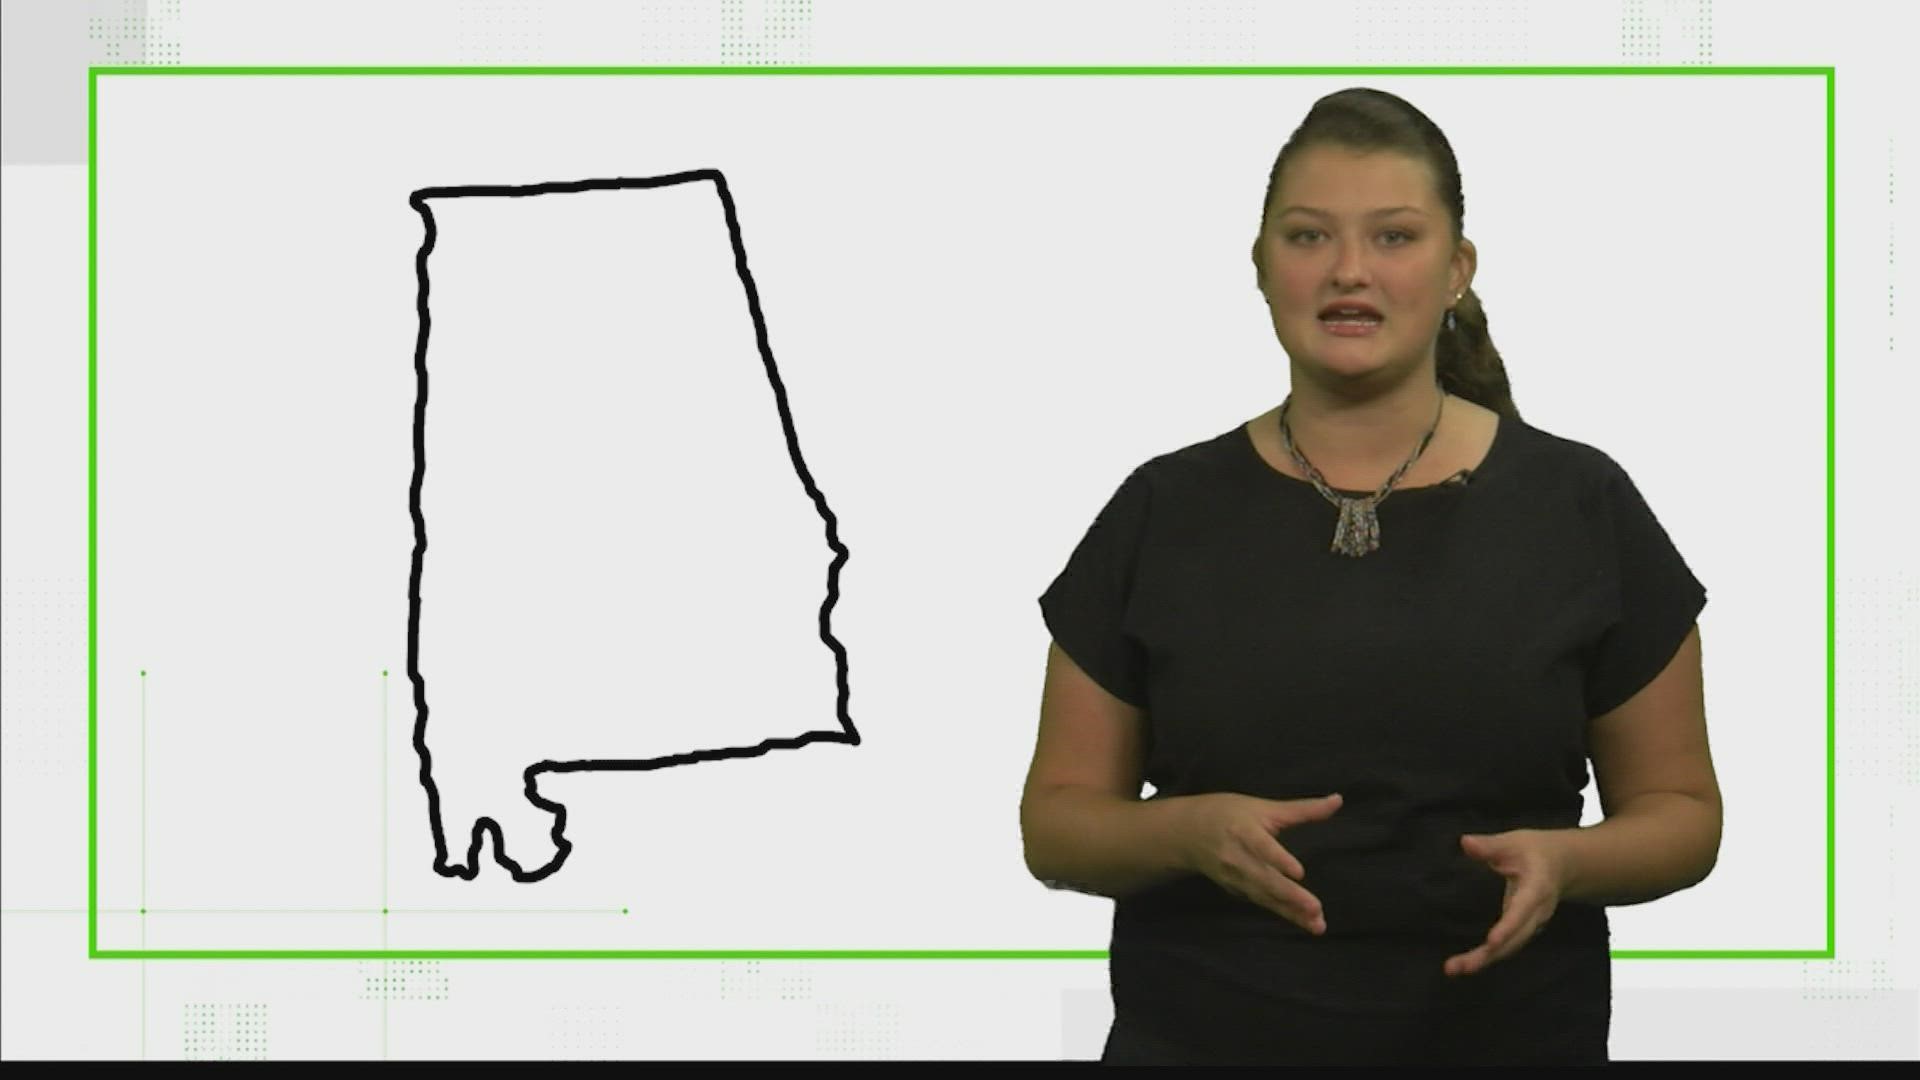 Wondering how Alabama's redistricting process works? WZDX's Nixon Norman spoke with the president of the Alabama League of Women Voters to find out.